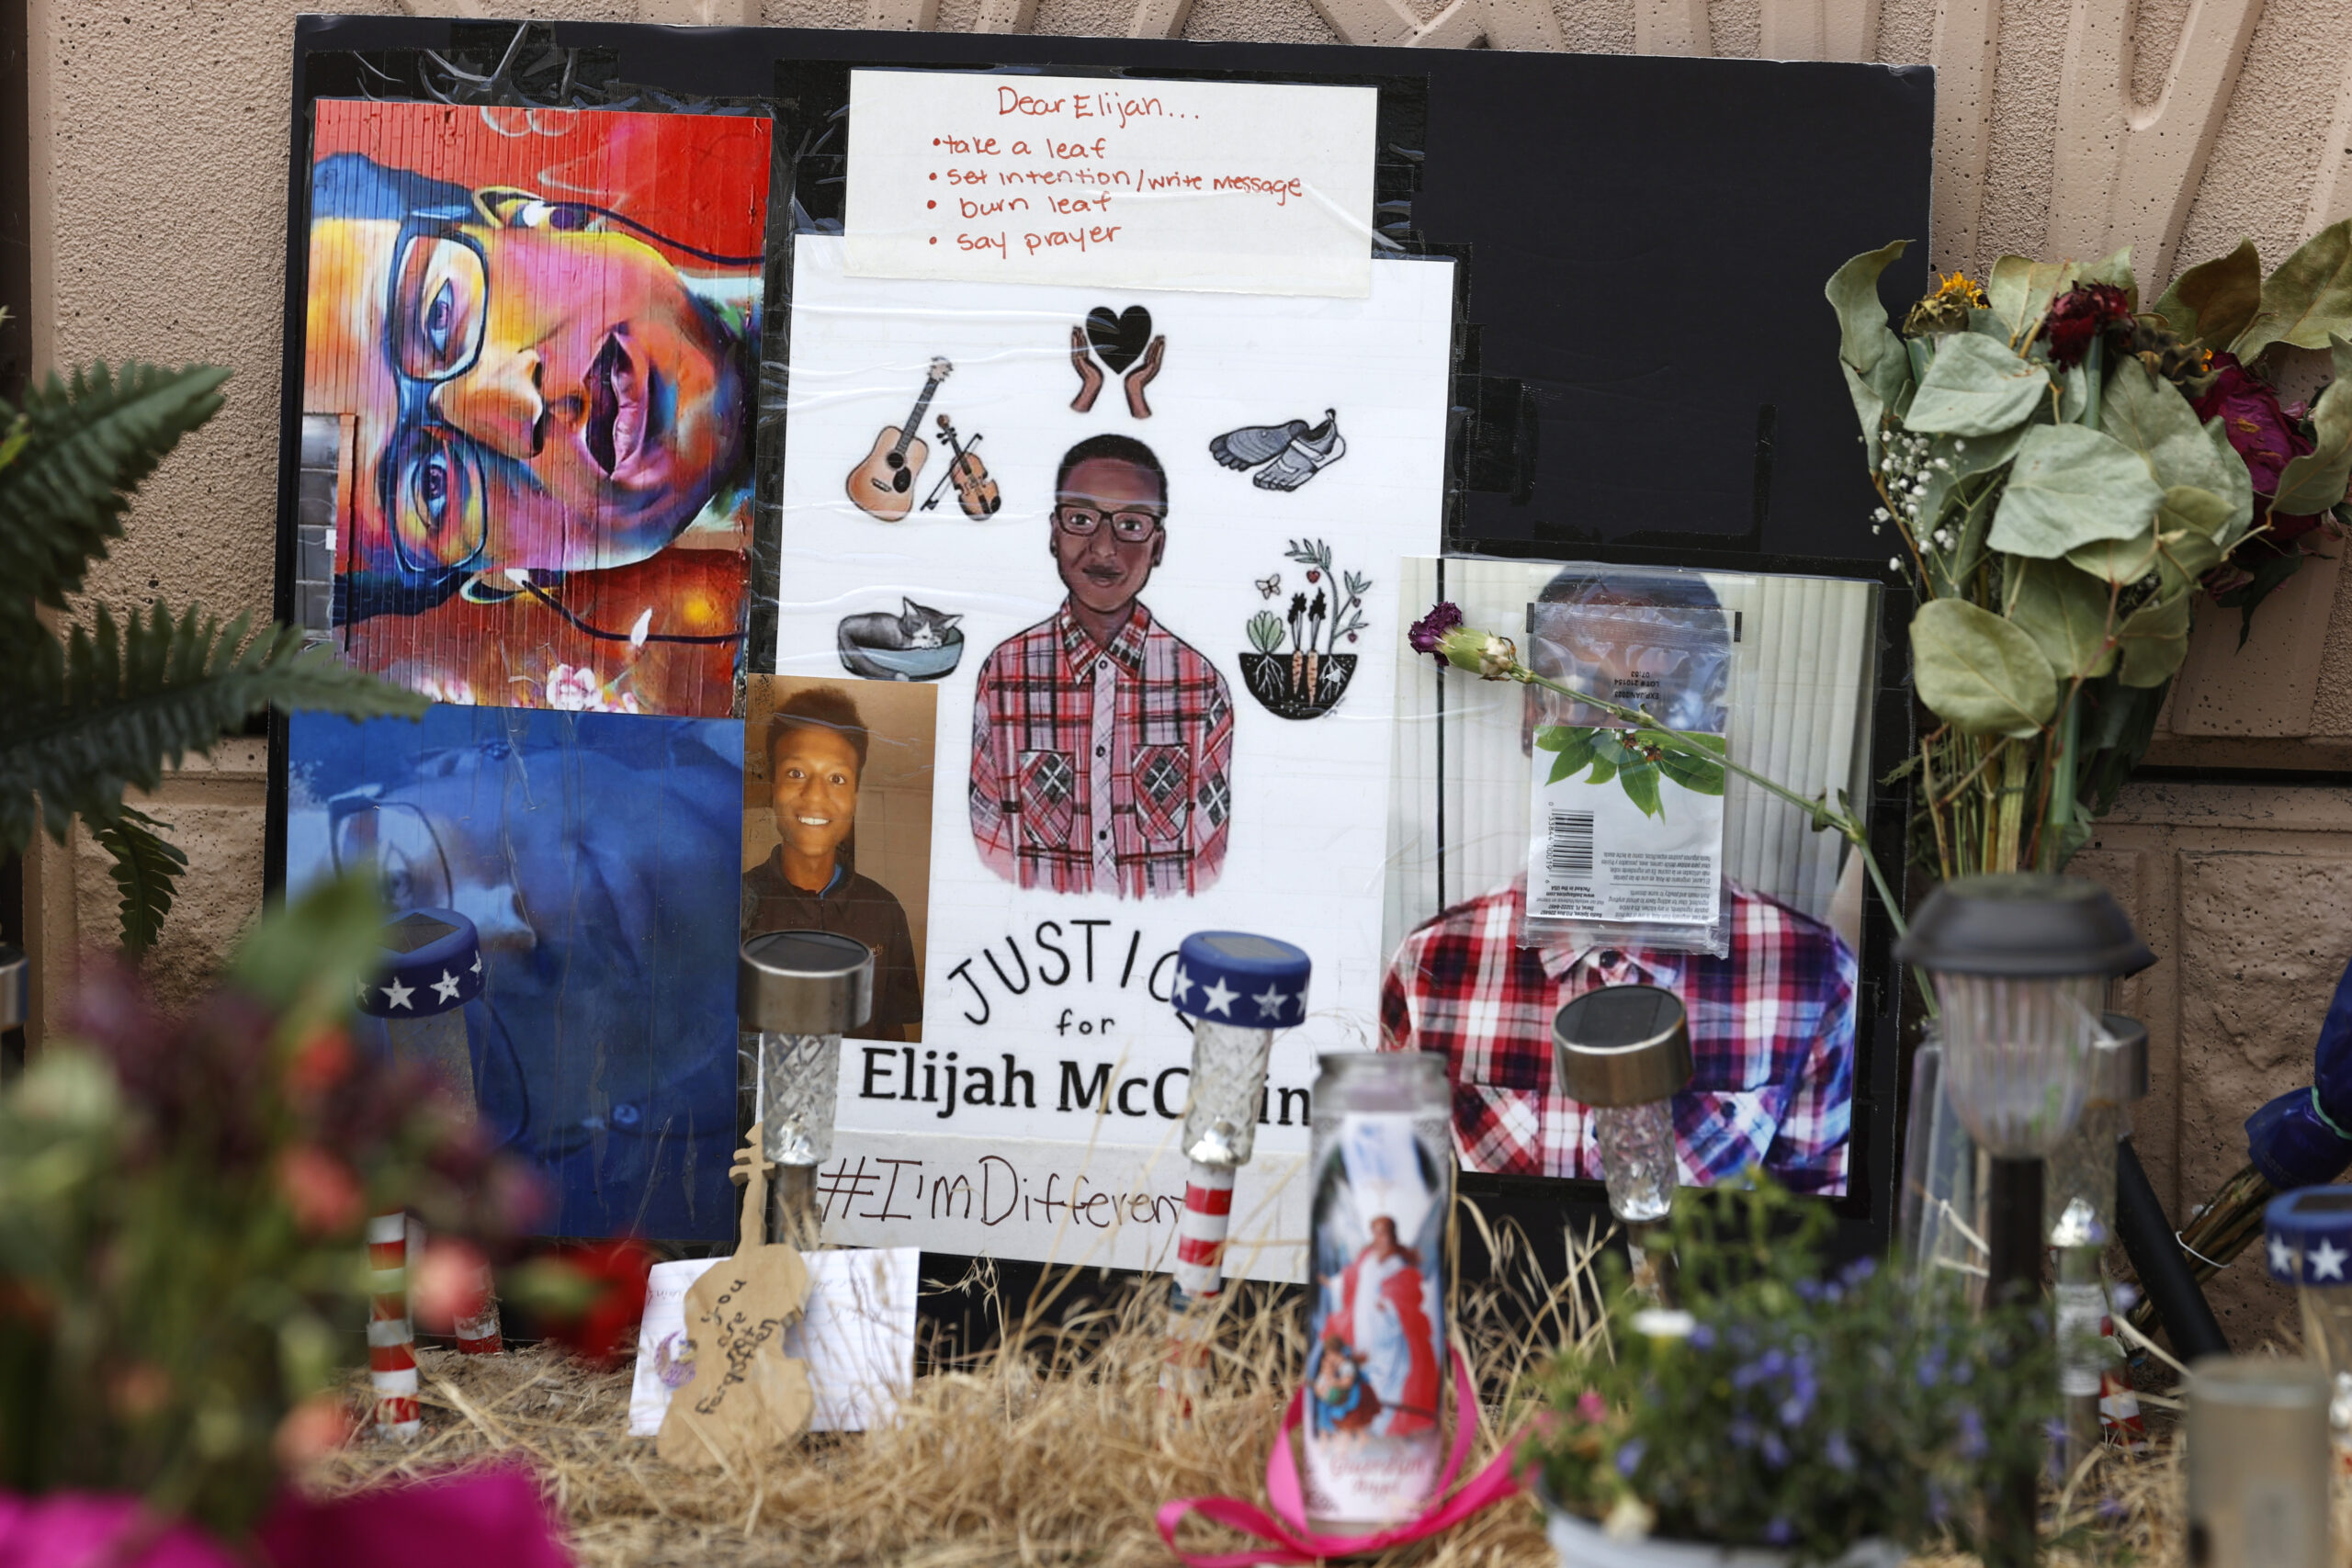 In this July 3, 2020, file photo, a makeshift memorial stands at a site across the street from where Elijah McClain was stopped by police officers while walking home in Aurora, Colorado. Photo credit: David Zalubowski, The Associated Press